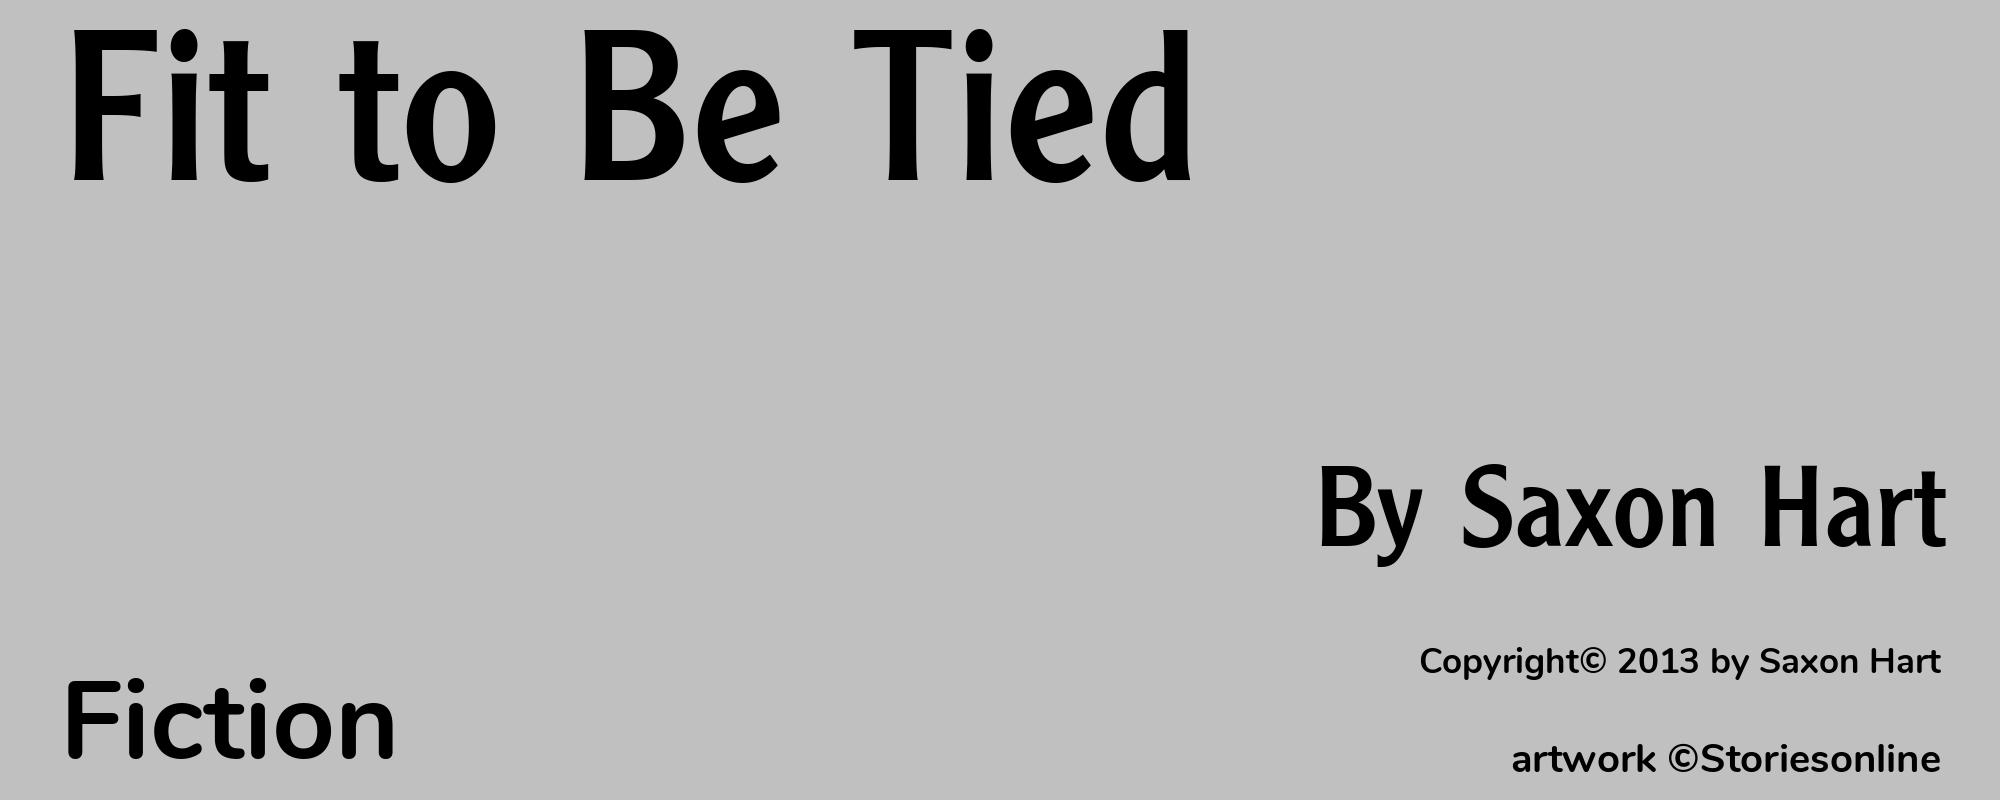 Fit to Be Tied - Cover